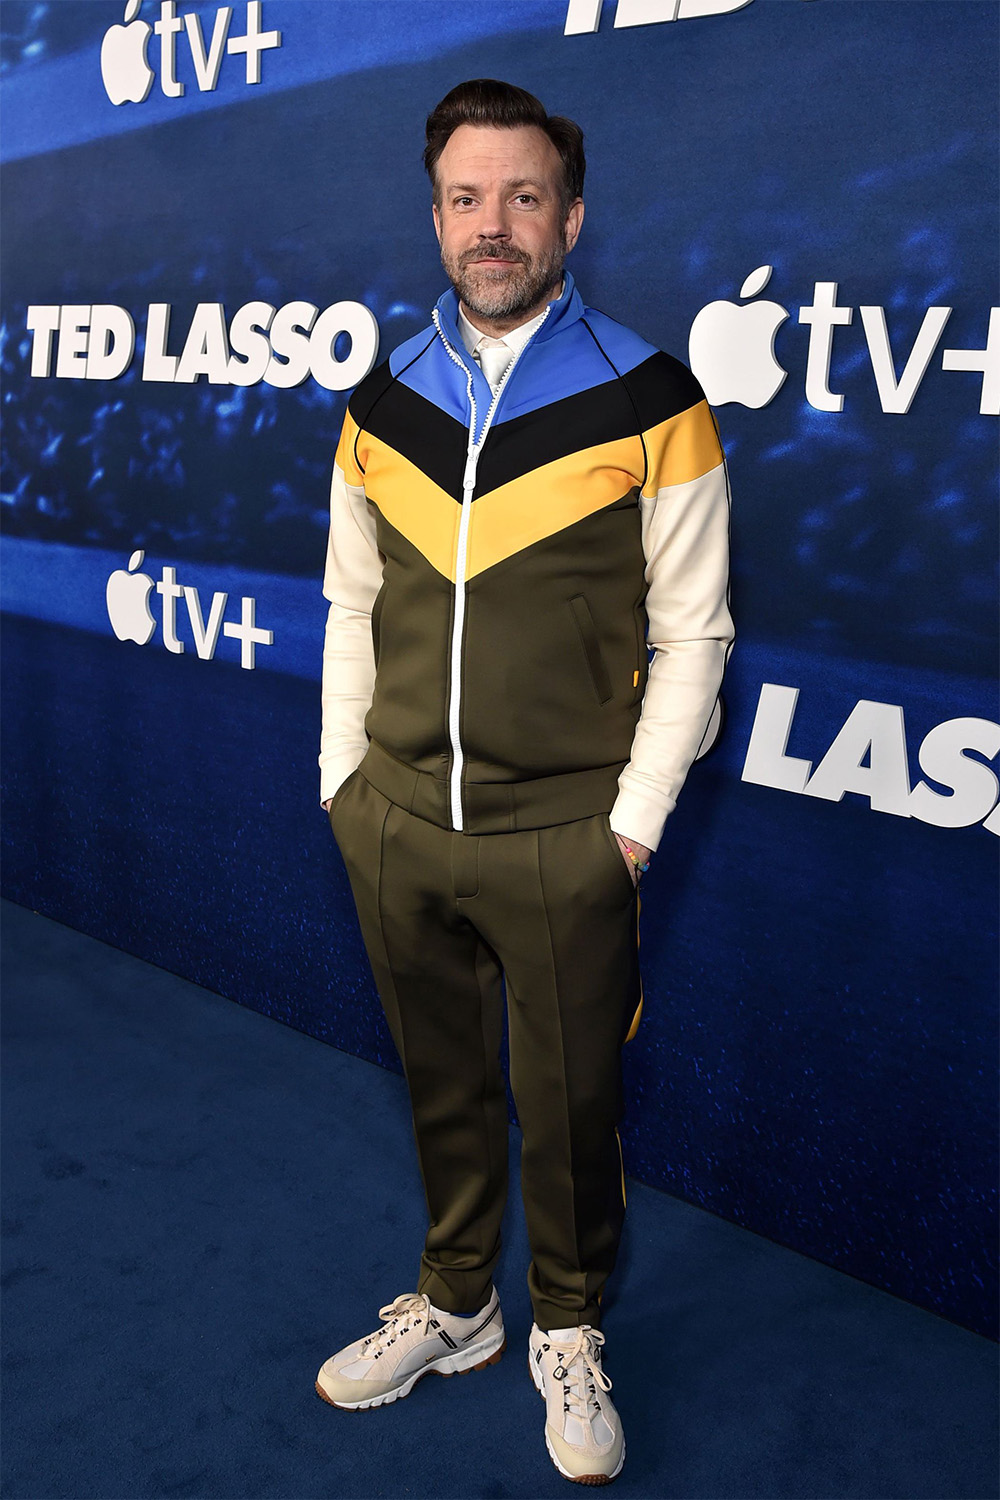 Jason Sudeikis Reveals He Keeps His DMs Open and Reads Everybody's 'Ted Lasso' Messages, Incredibly Moving